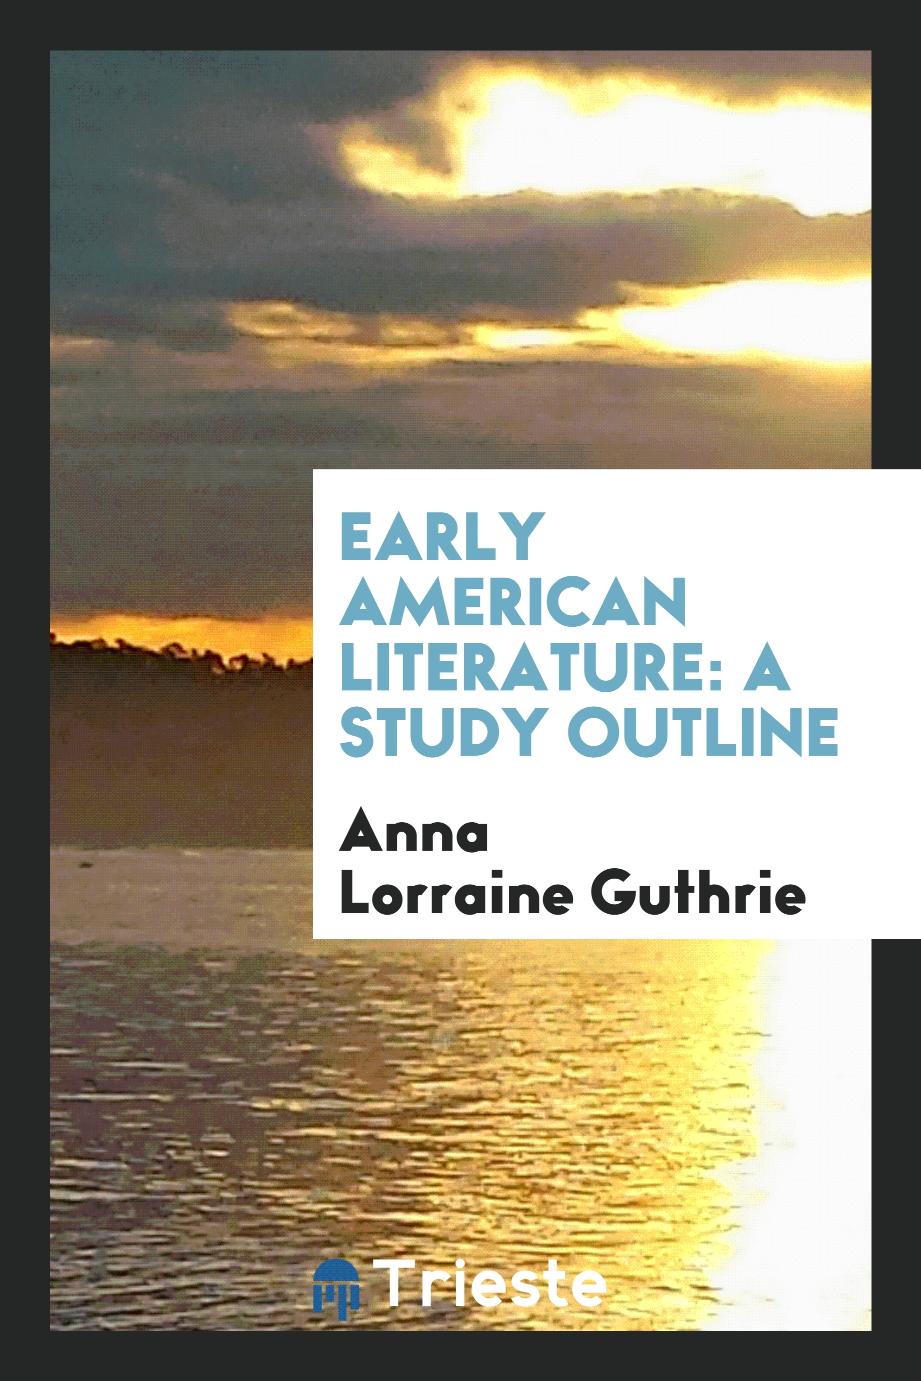 Early American literature: a study outline